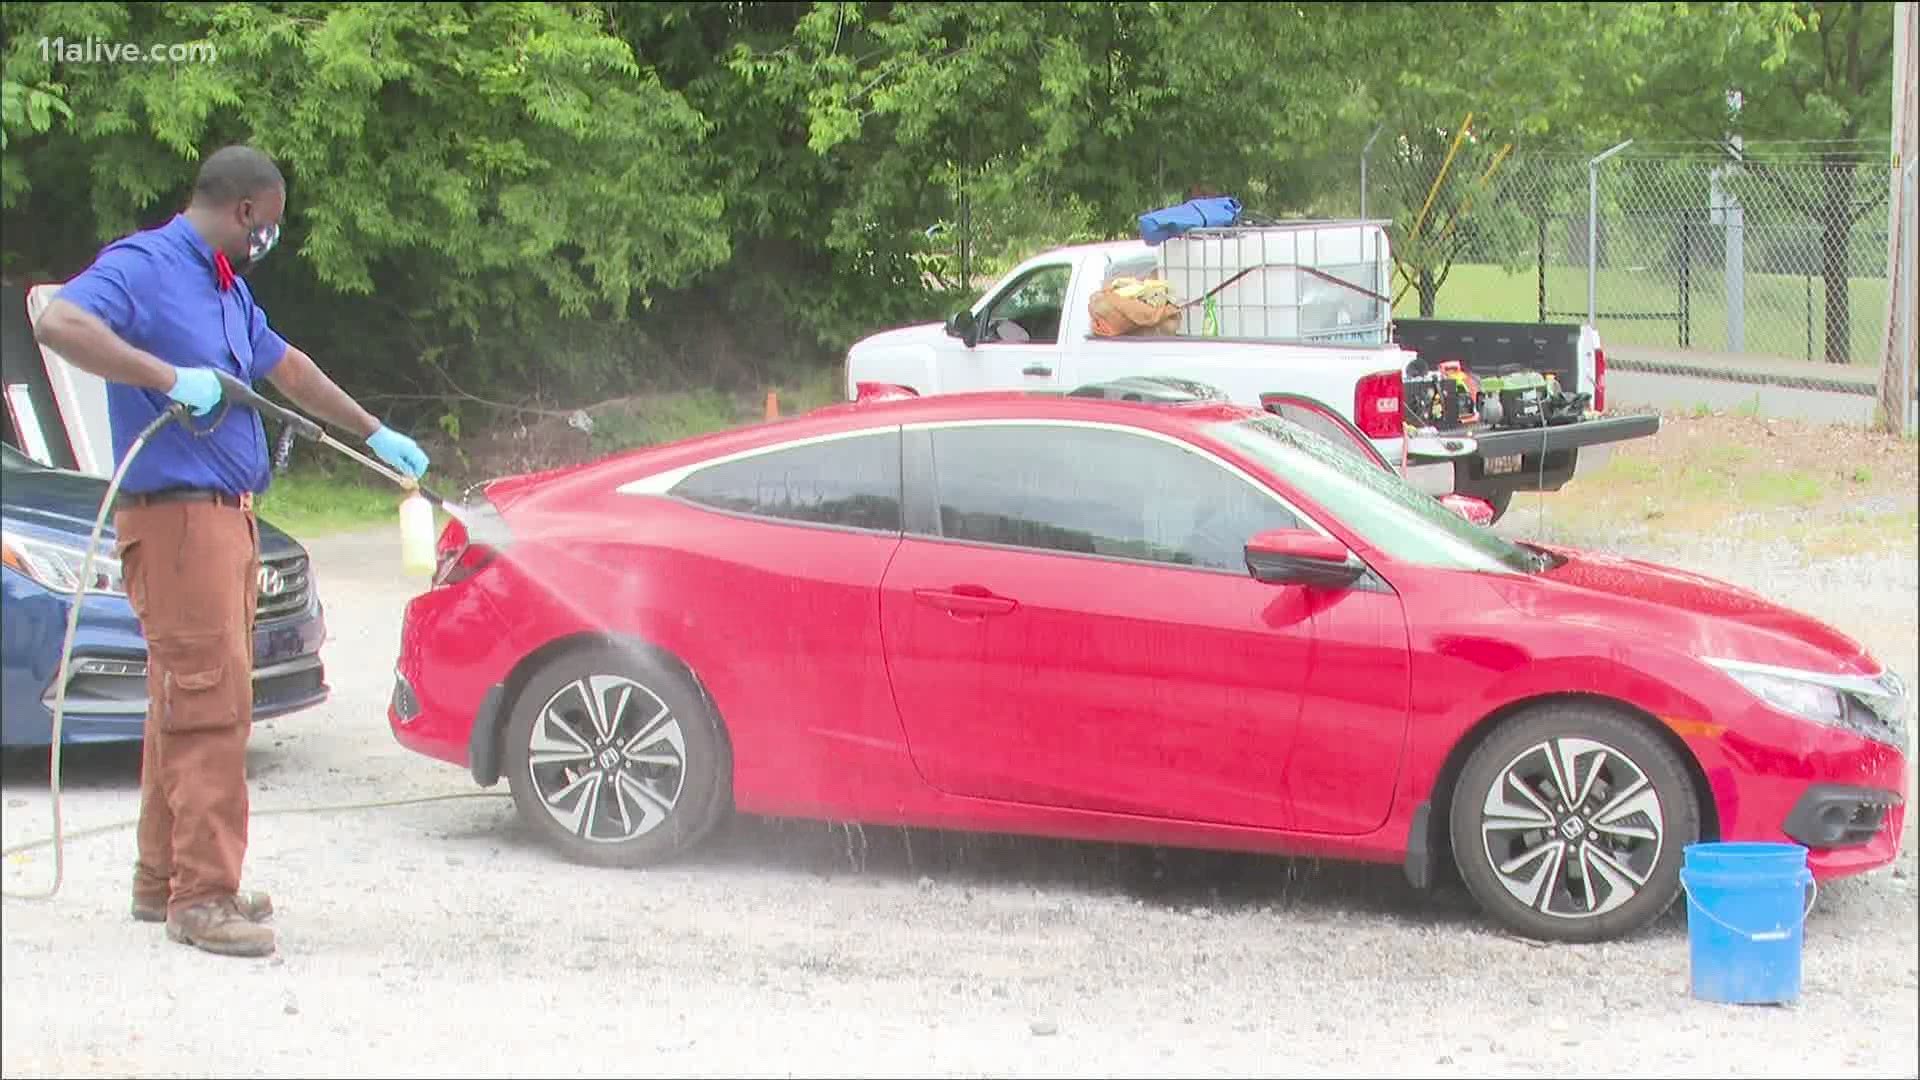 New car wash offers free washes for grand opening | 11alive.com